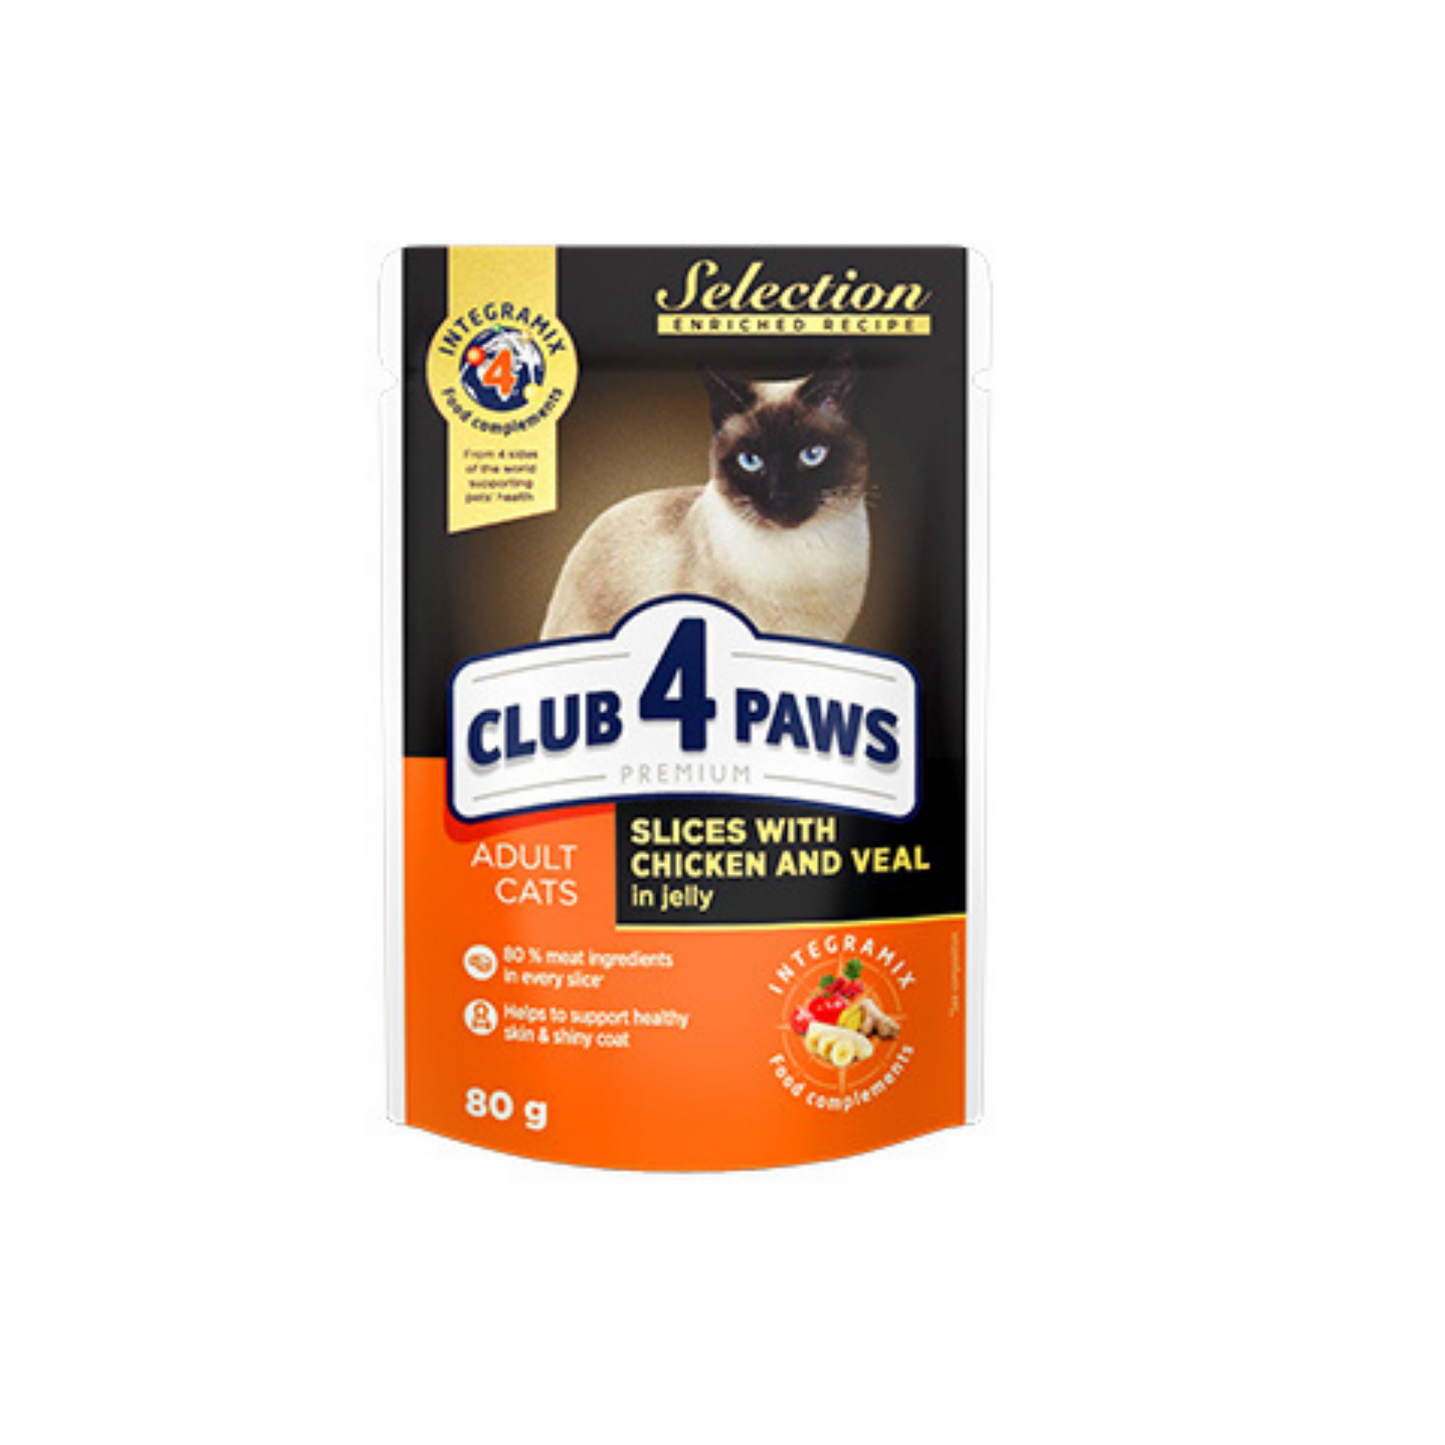 CLUB 4 PAWS Premium Selection with Chicken & Veal in Jelly